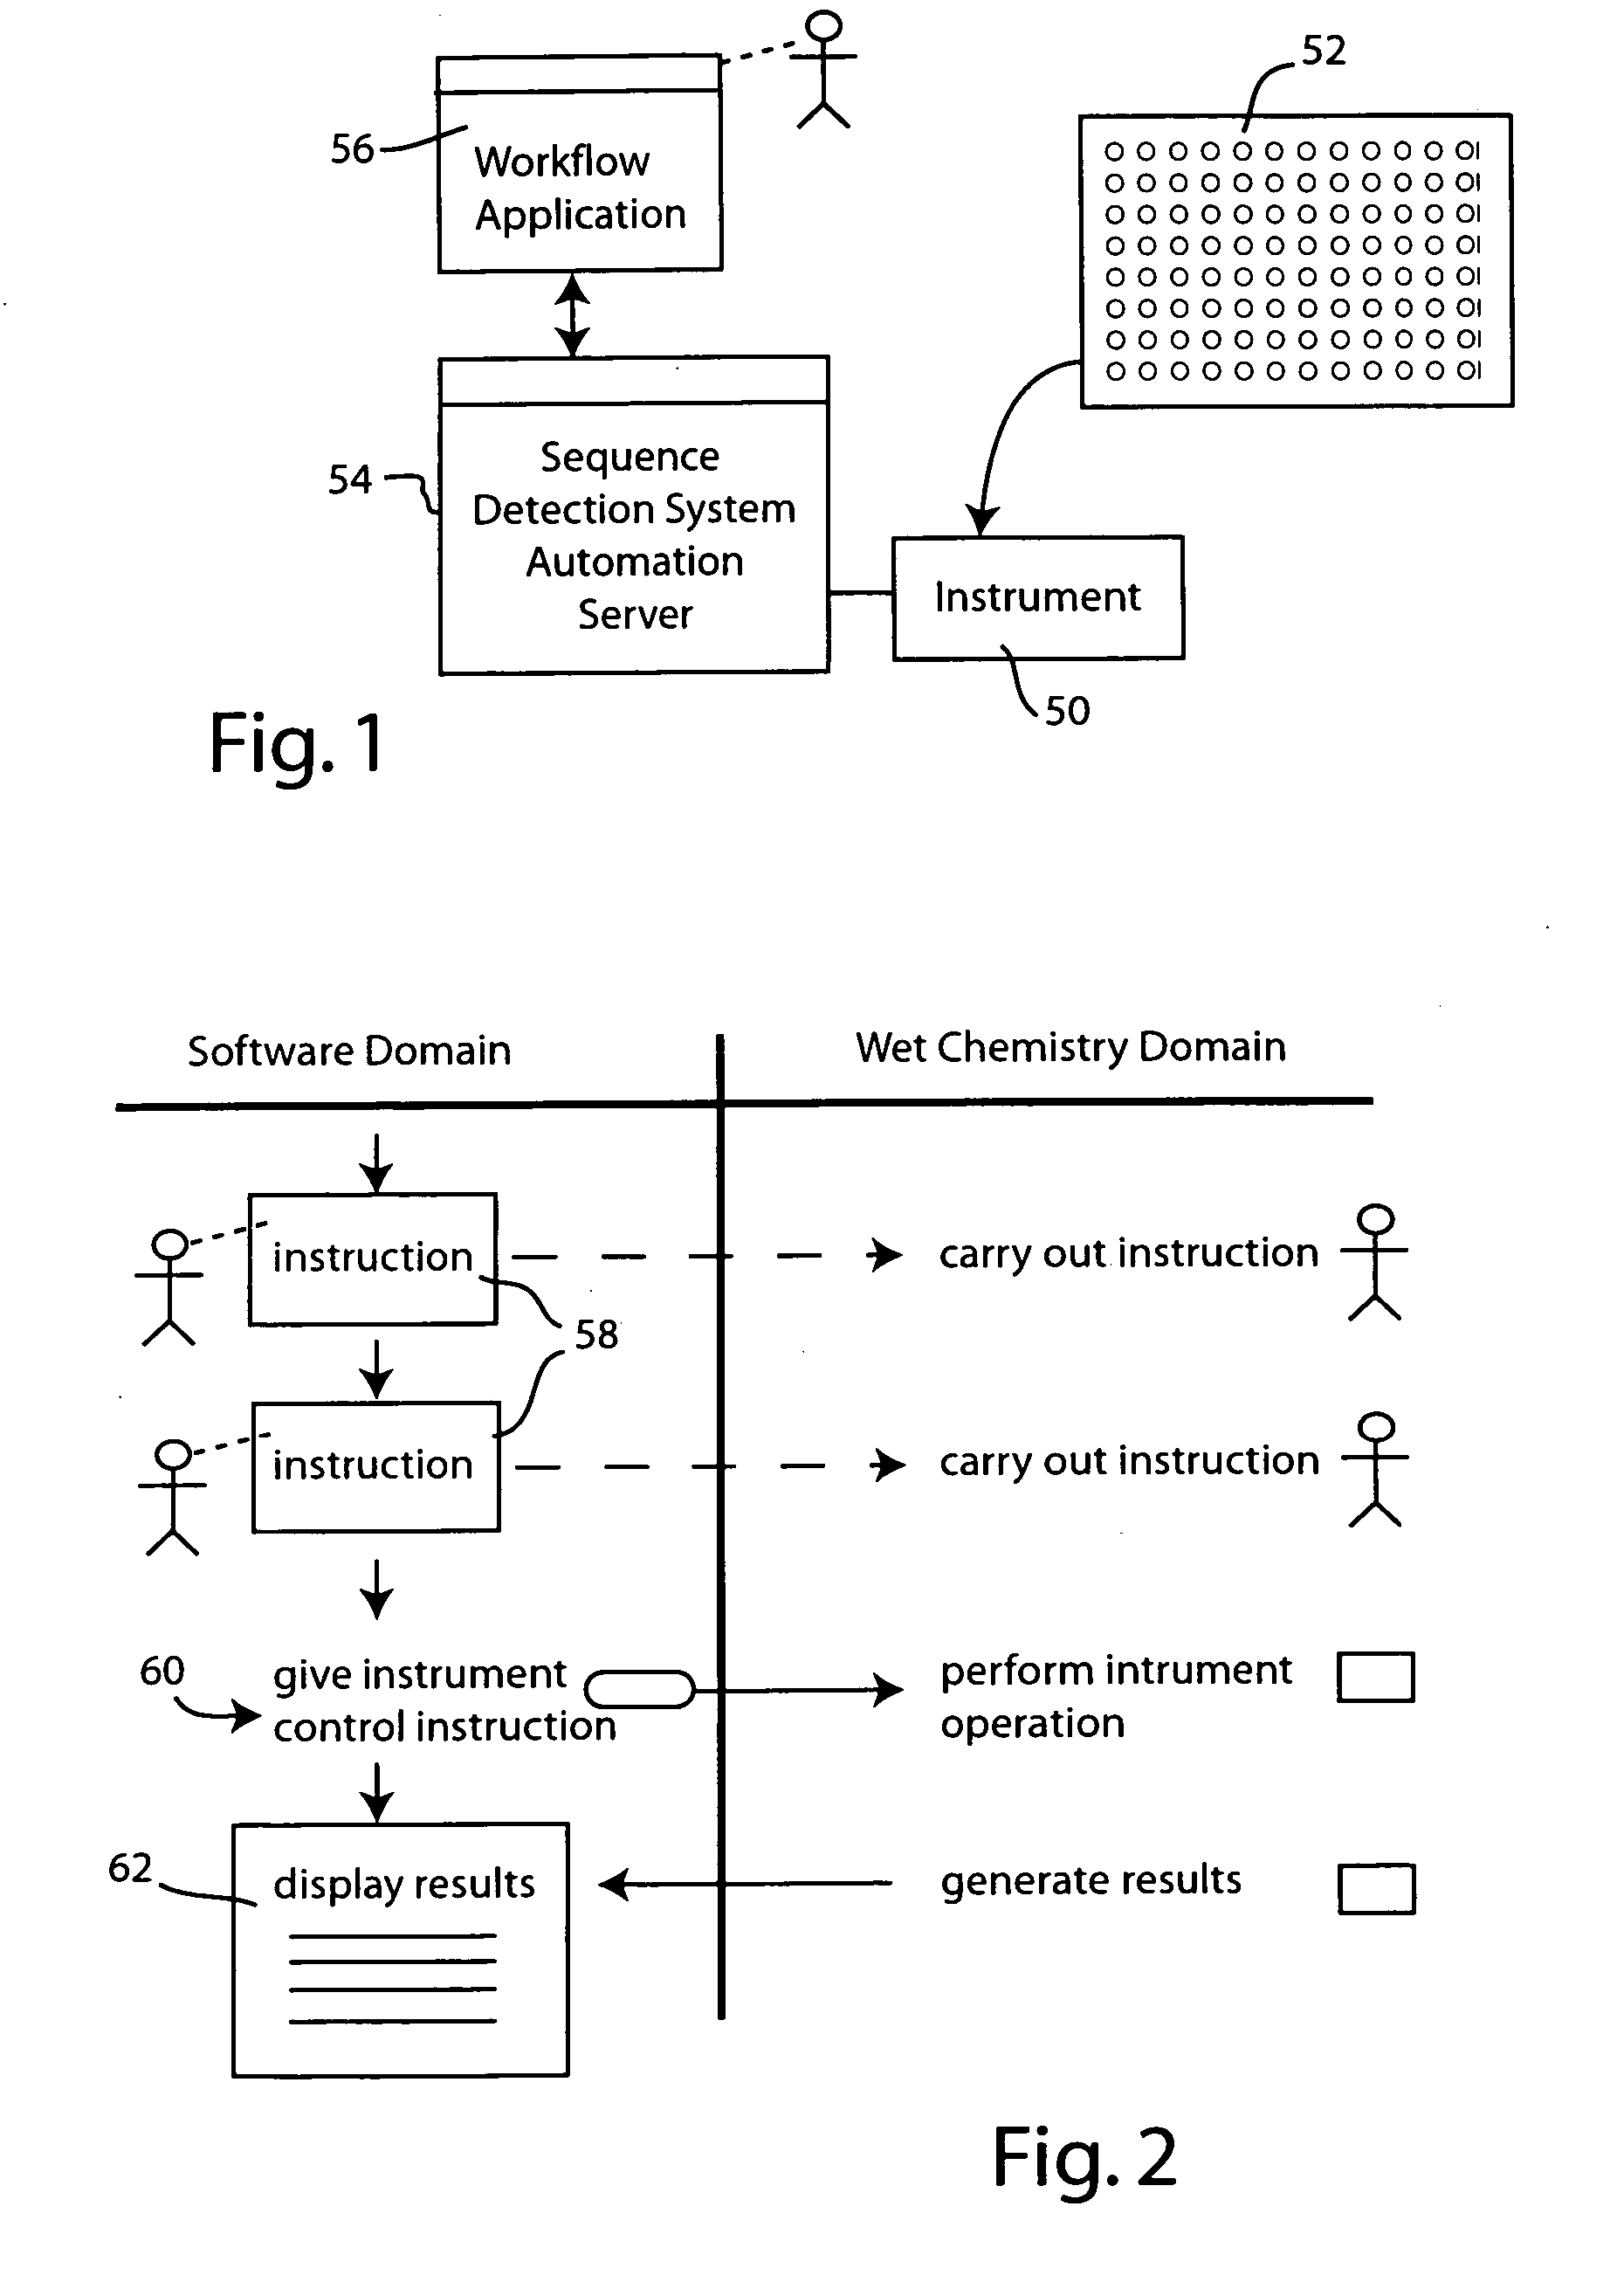 Systems and methods for generating automated software workflows for biological testing